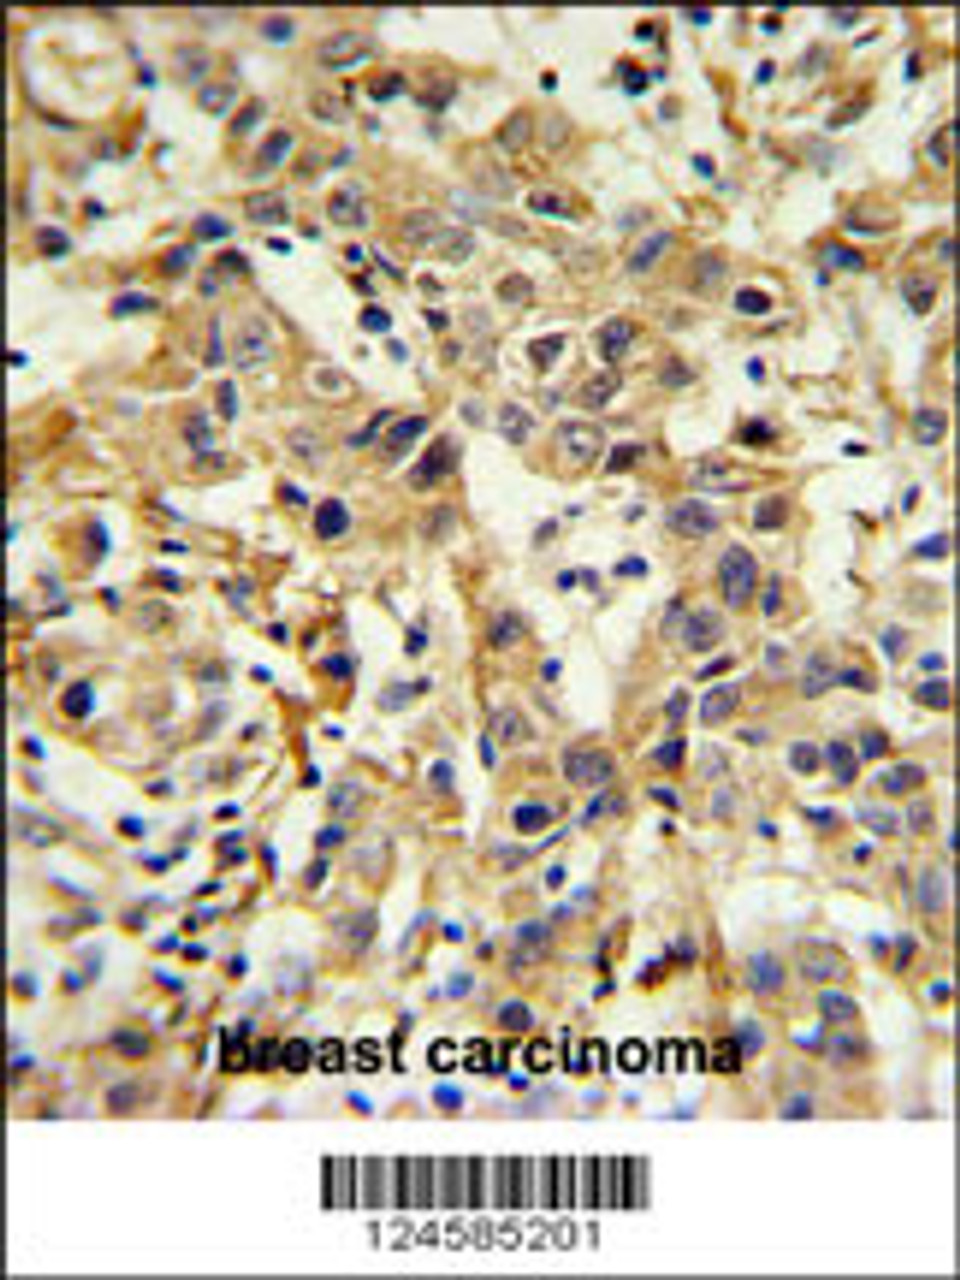 CA6 Antibody IHC analysis in formalin fixed and paraffin embedded breast carcinoma followed by peroxidase conjugation of the secondary antibody and DAB staining.